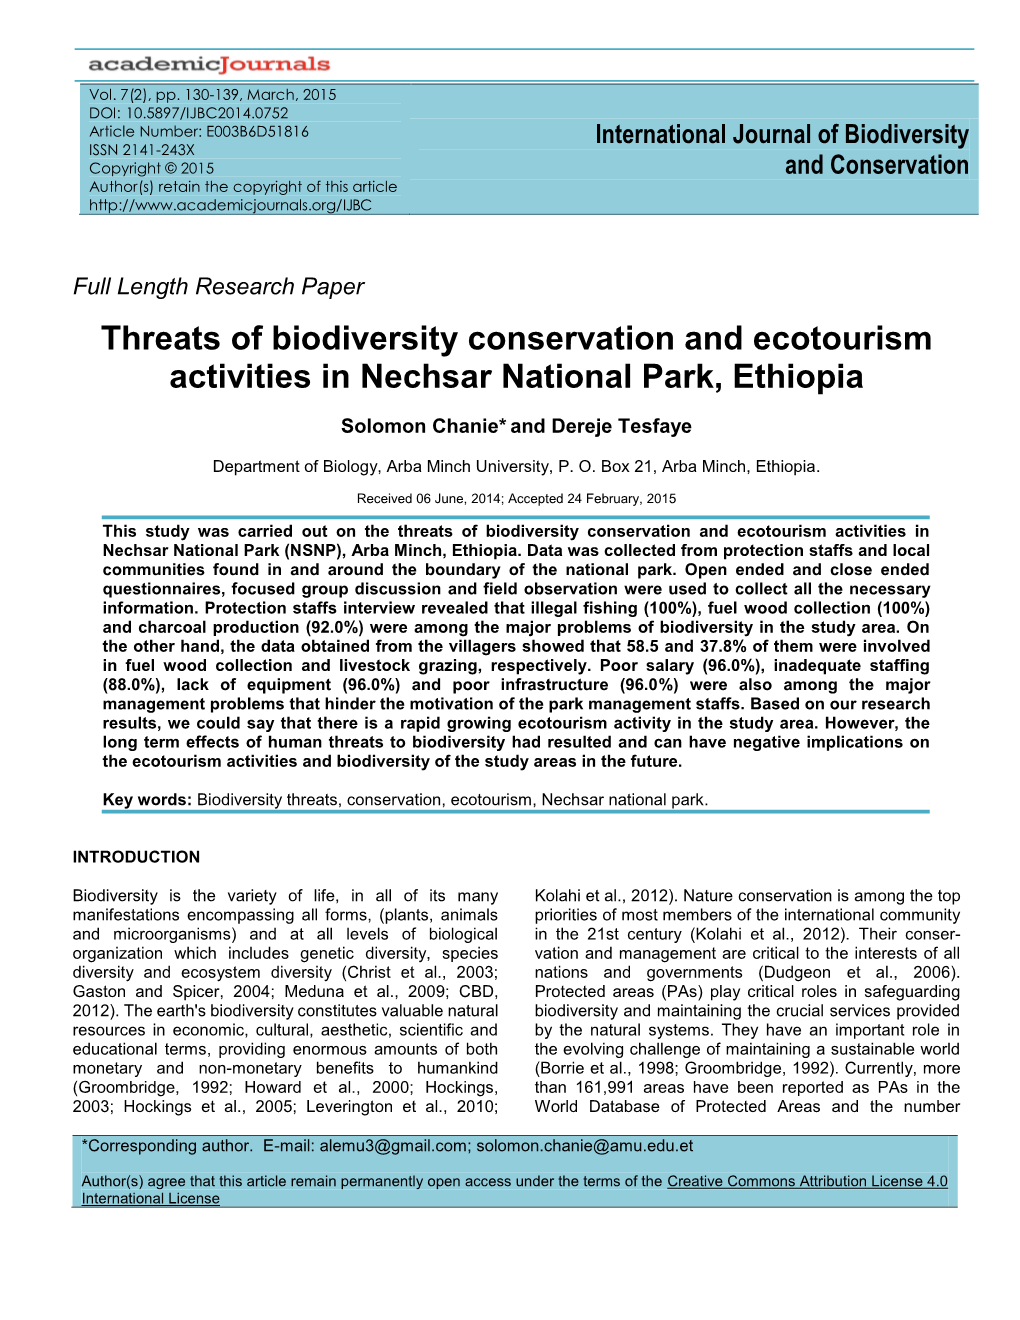 Threats of Biodiversity Conservation and Ecotourism Activities in Nechsar National Park, Ethiopia